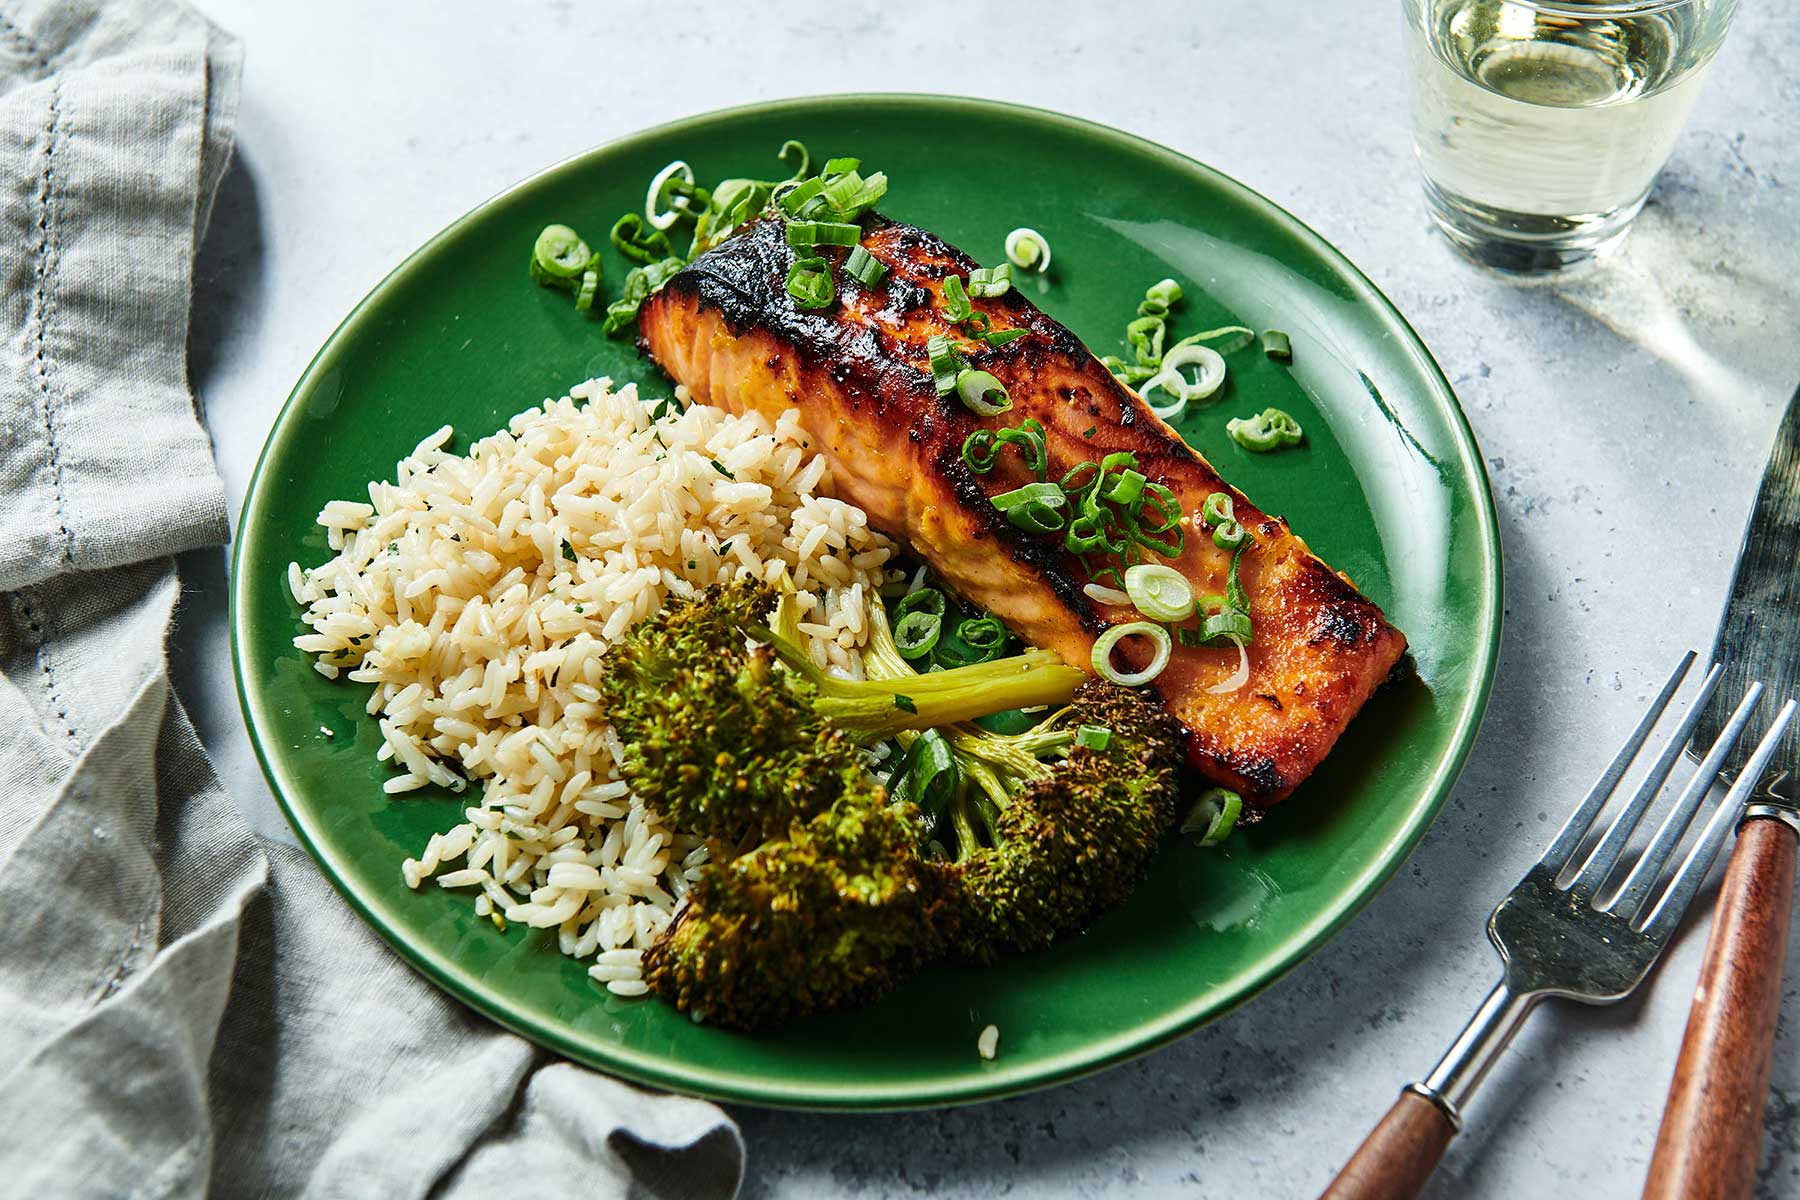 Table setting with broiled Miso Salmon on green plate with broccoli and rice.